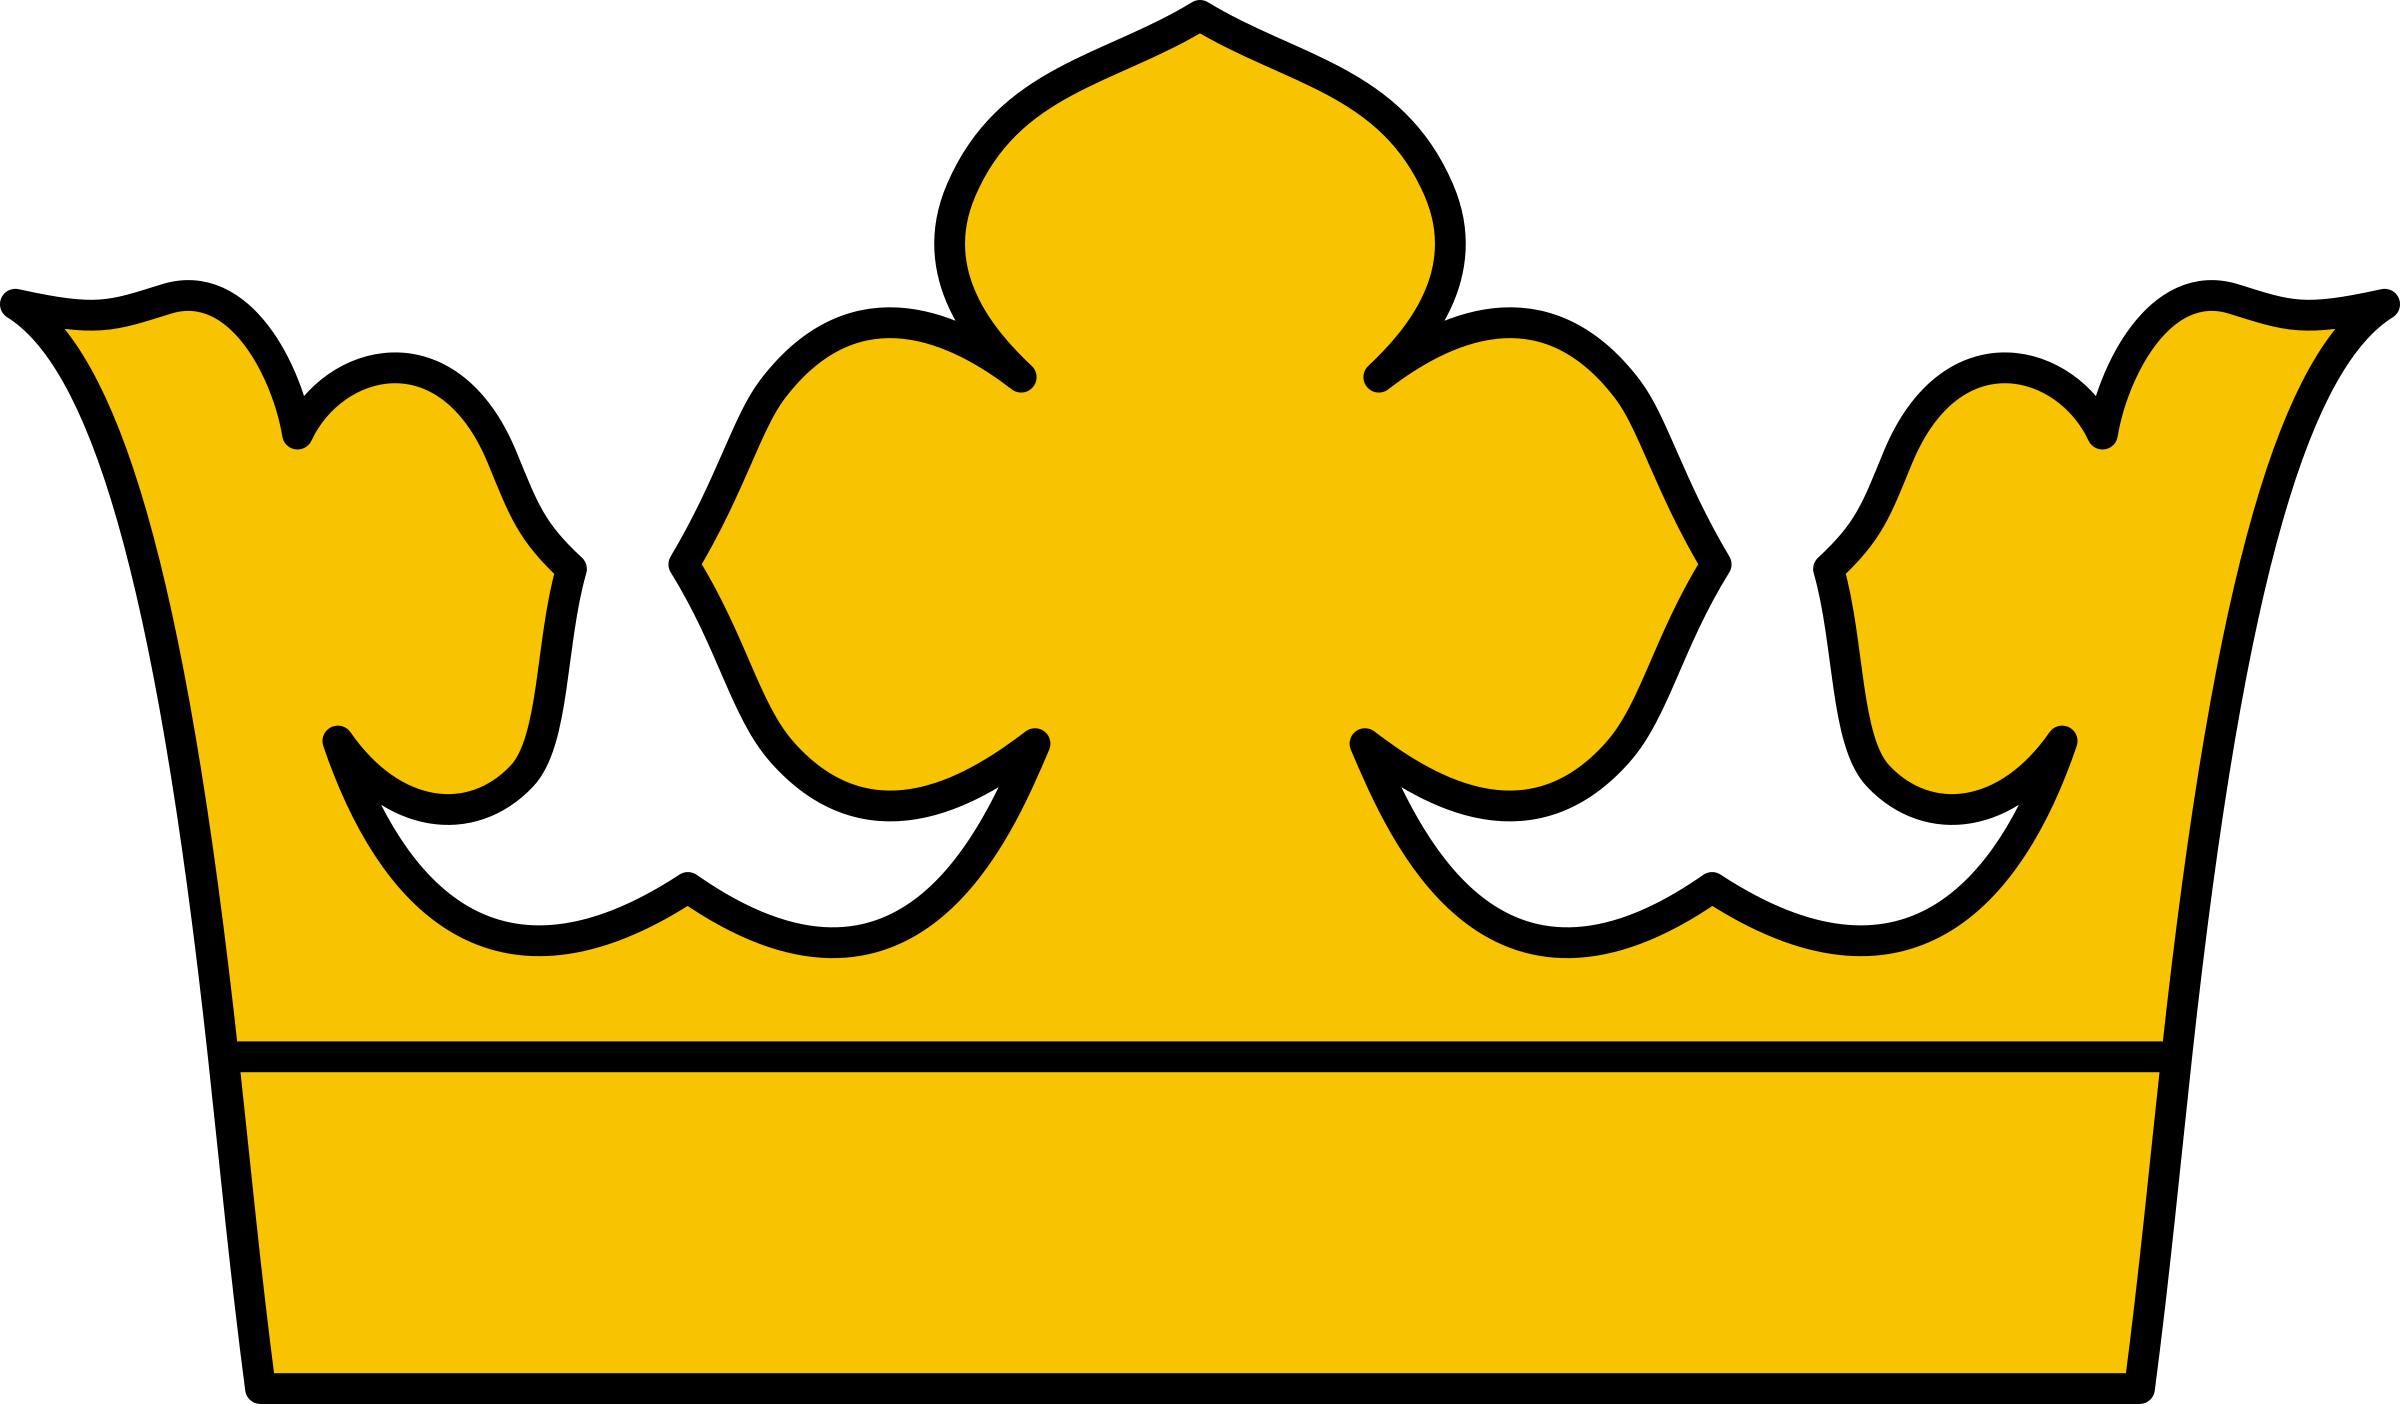 clipart crown animated